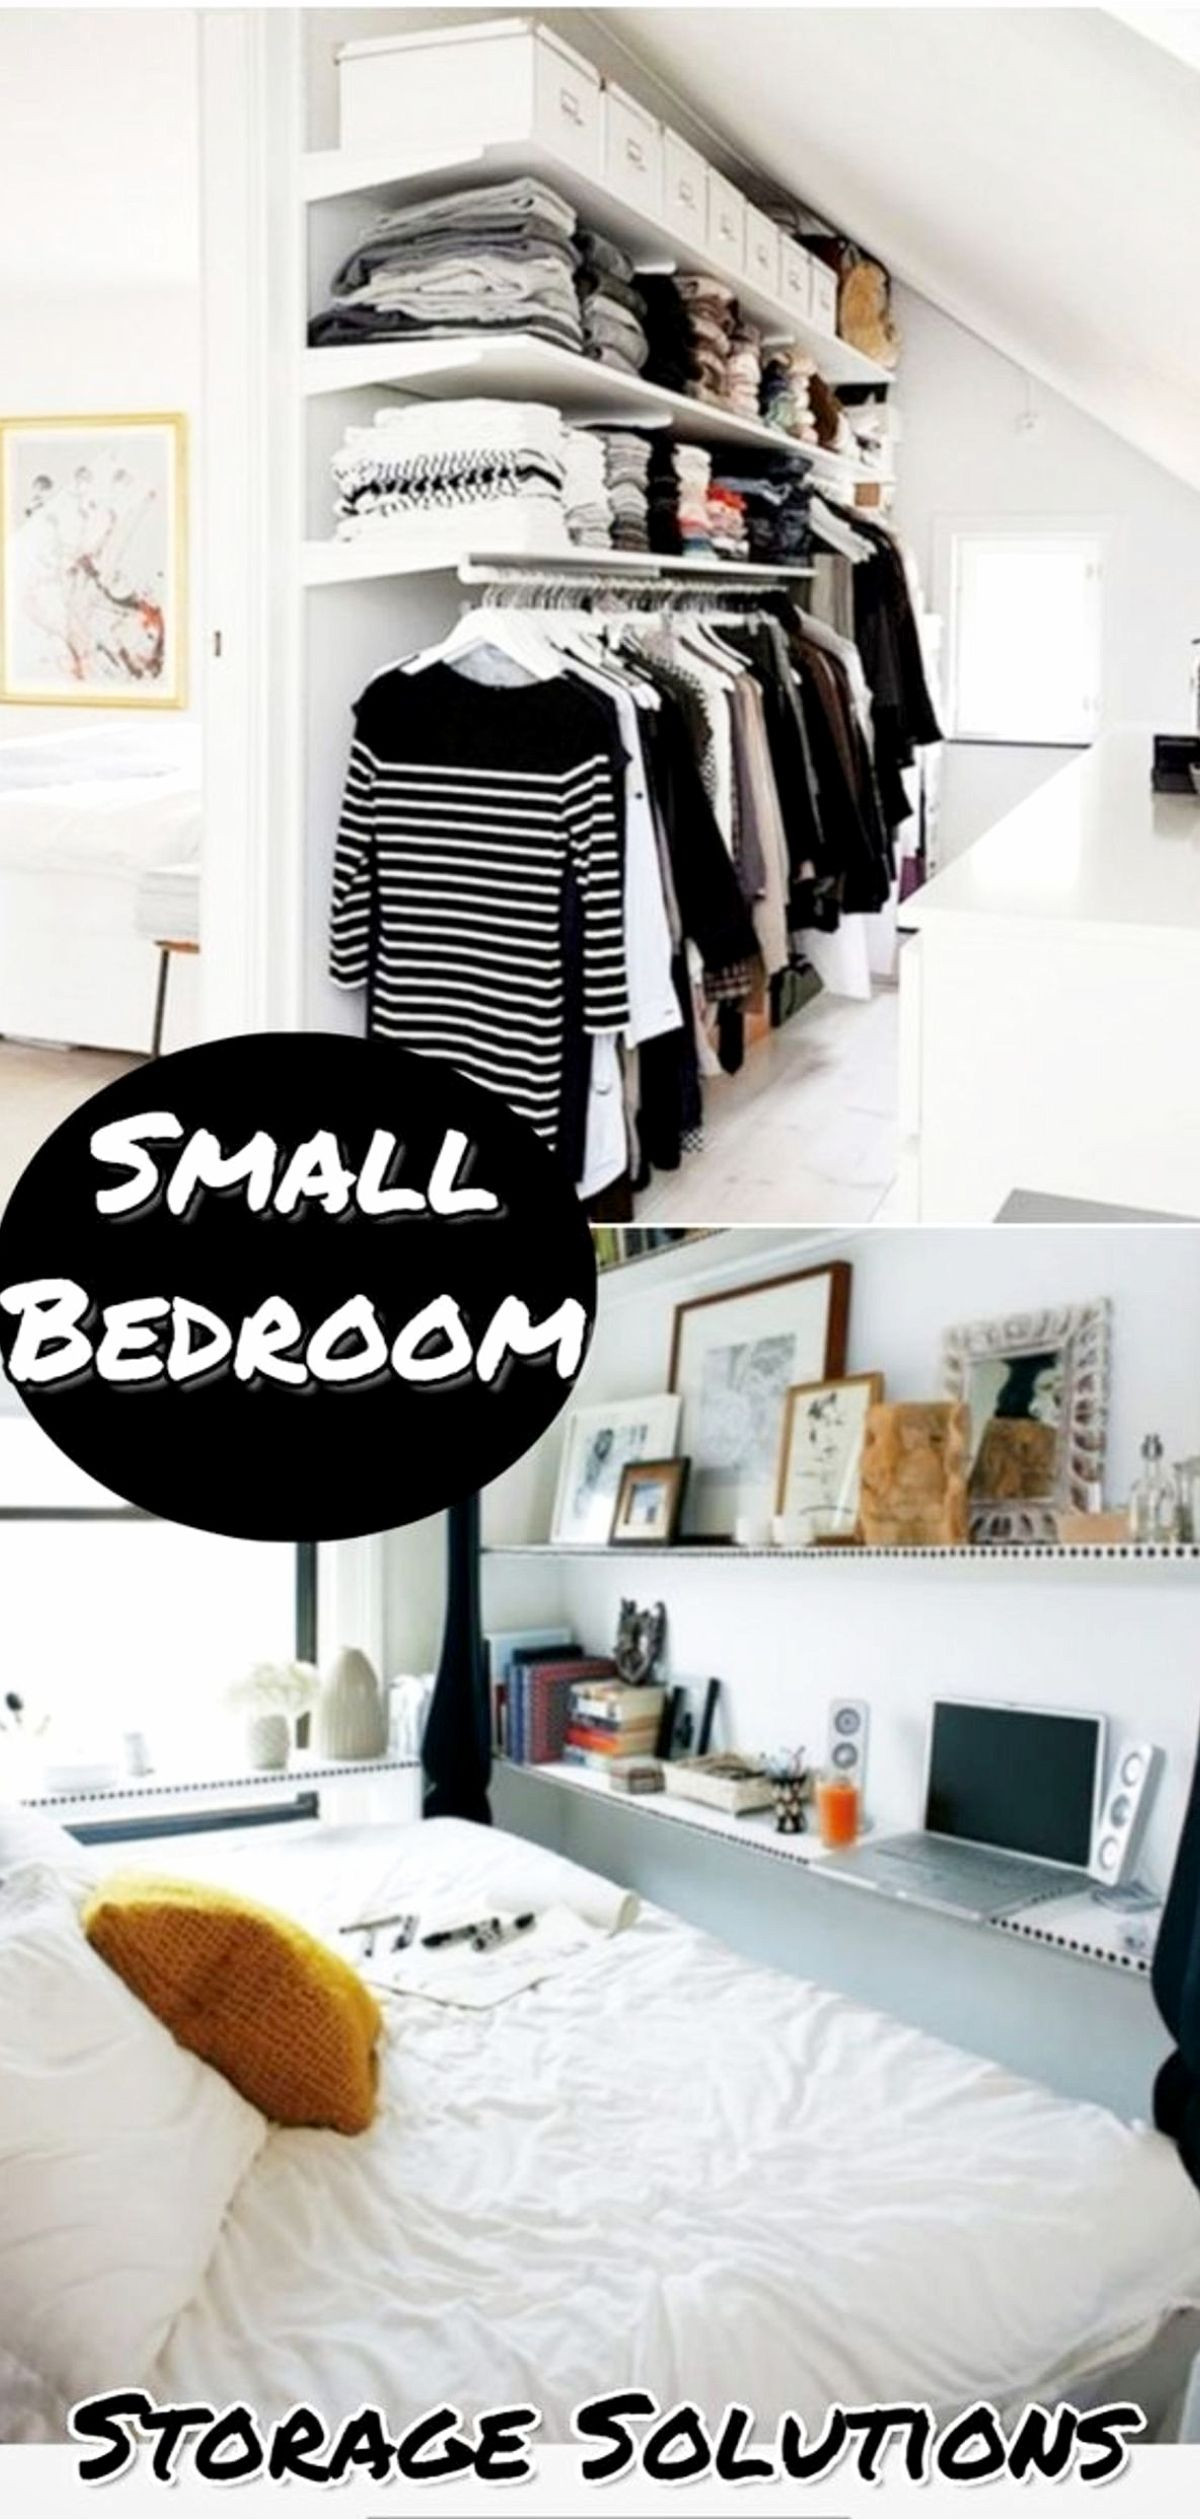 DIY Small Room Organization
 38 Creative Storage Solutions for Small Spaces Awesome